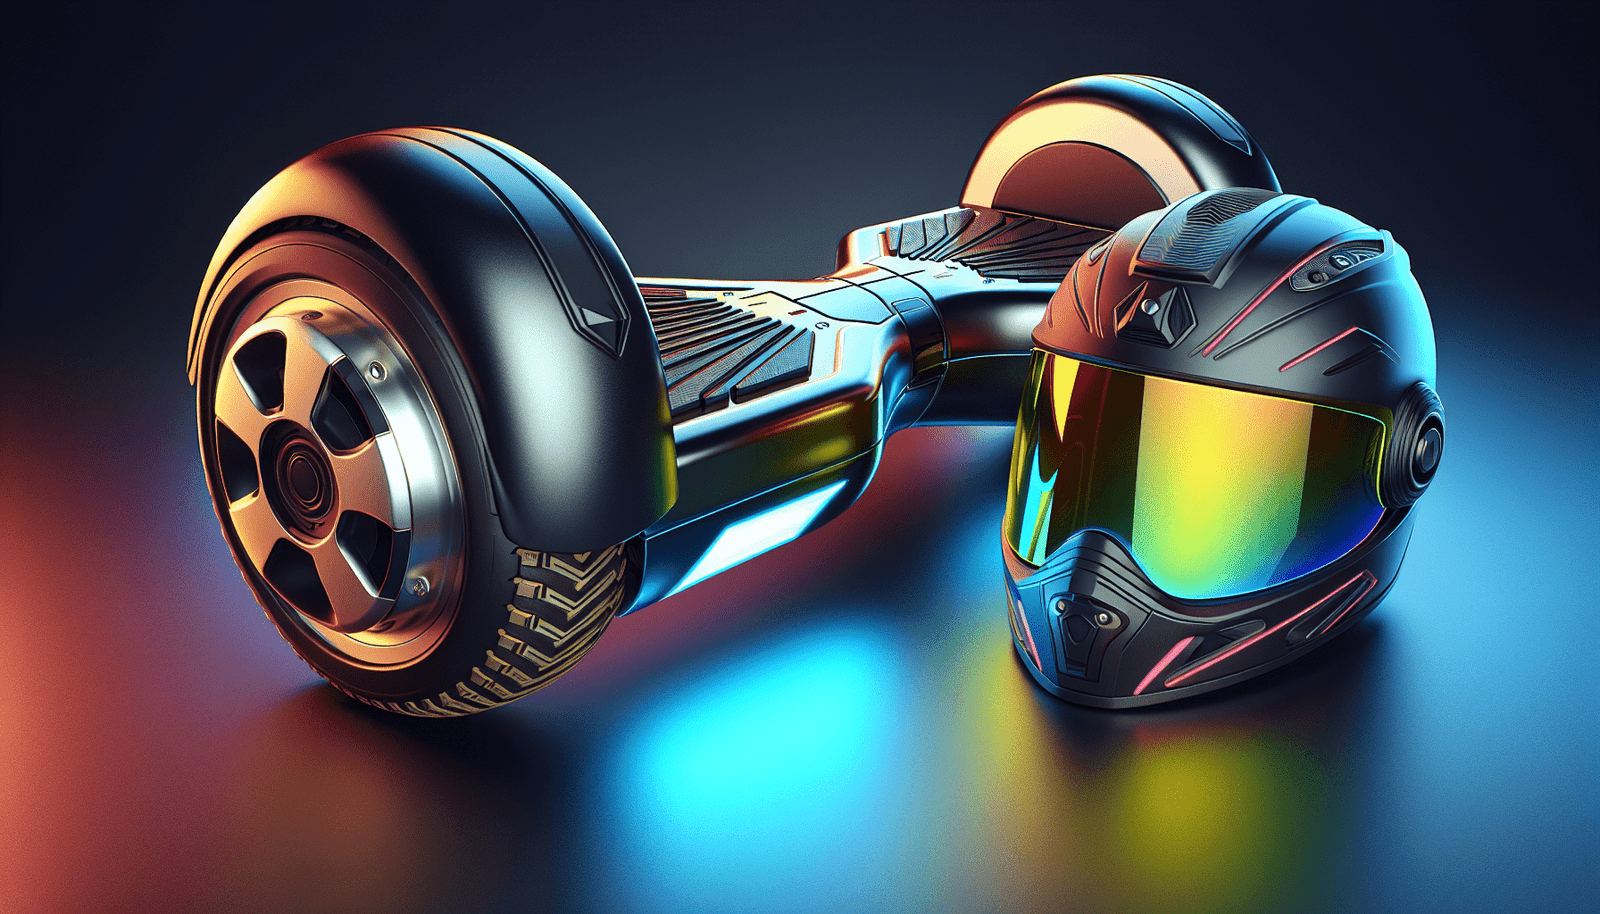 Are There Specific Laws Regarding The Use Of Helmets With Hoverboards?